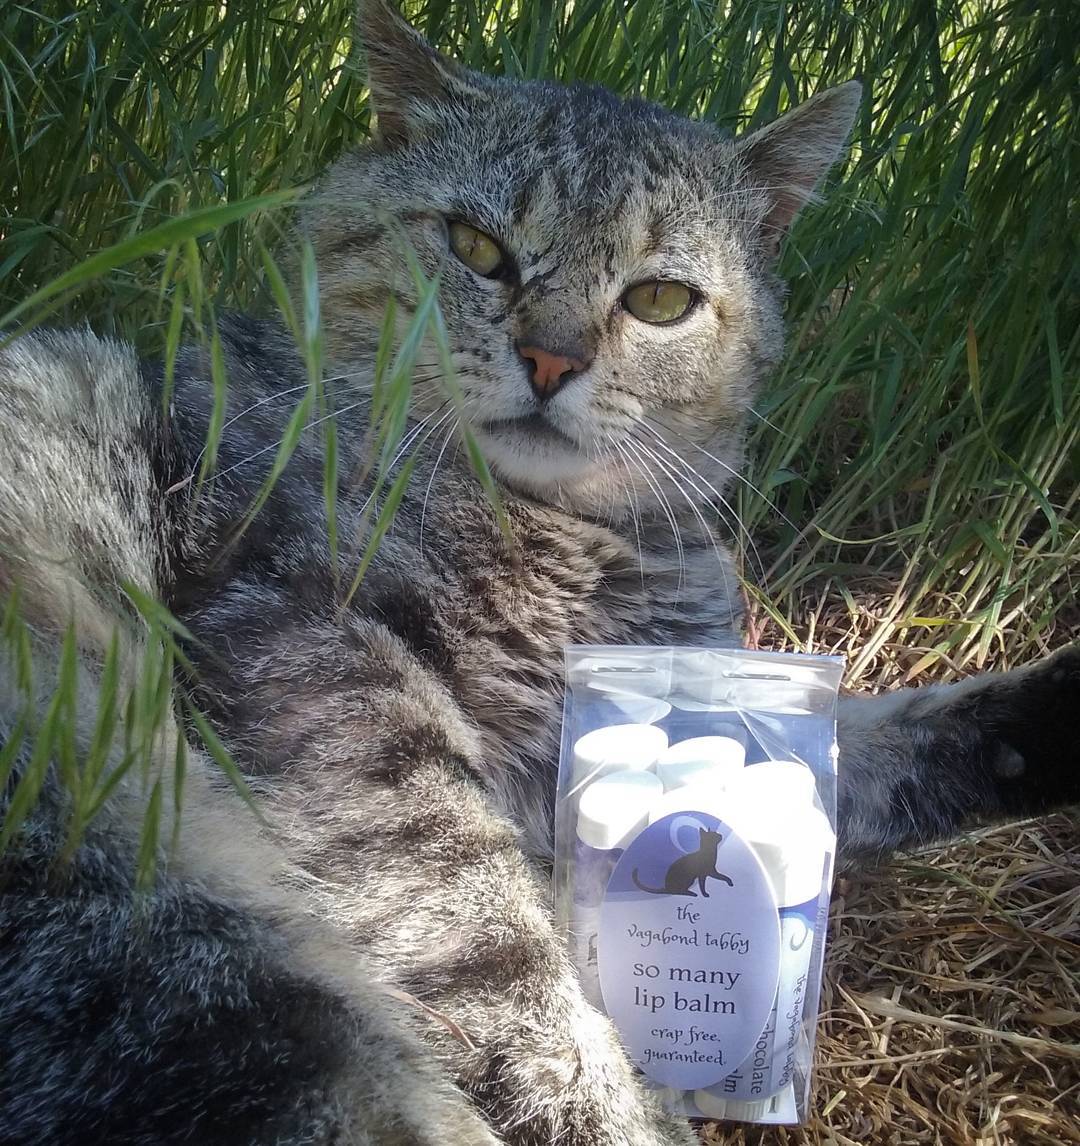 Major Tom, a big grey tabby, is flopped on his side in the grass. Tucked between his paws is a plastic bag with six tubes of lip balm inside. Tom looks really offended by this.